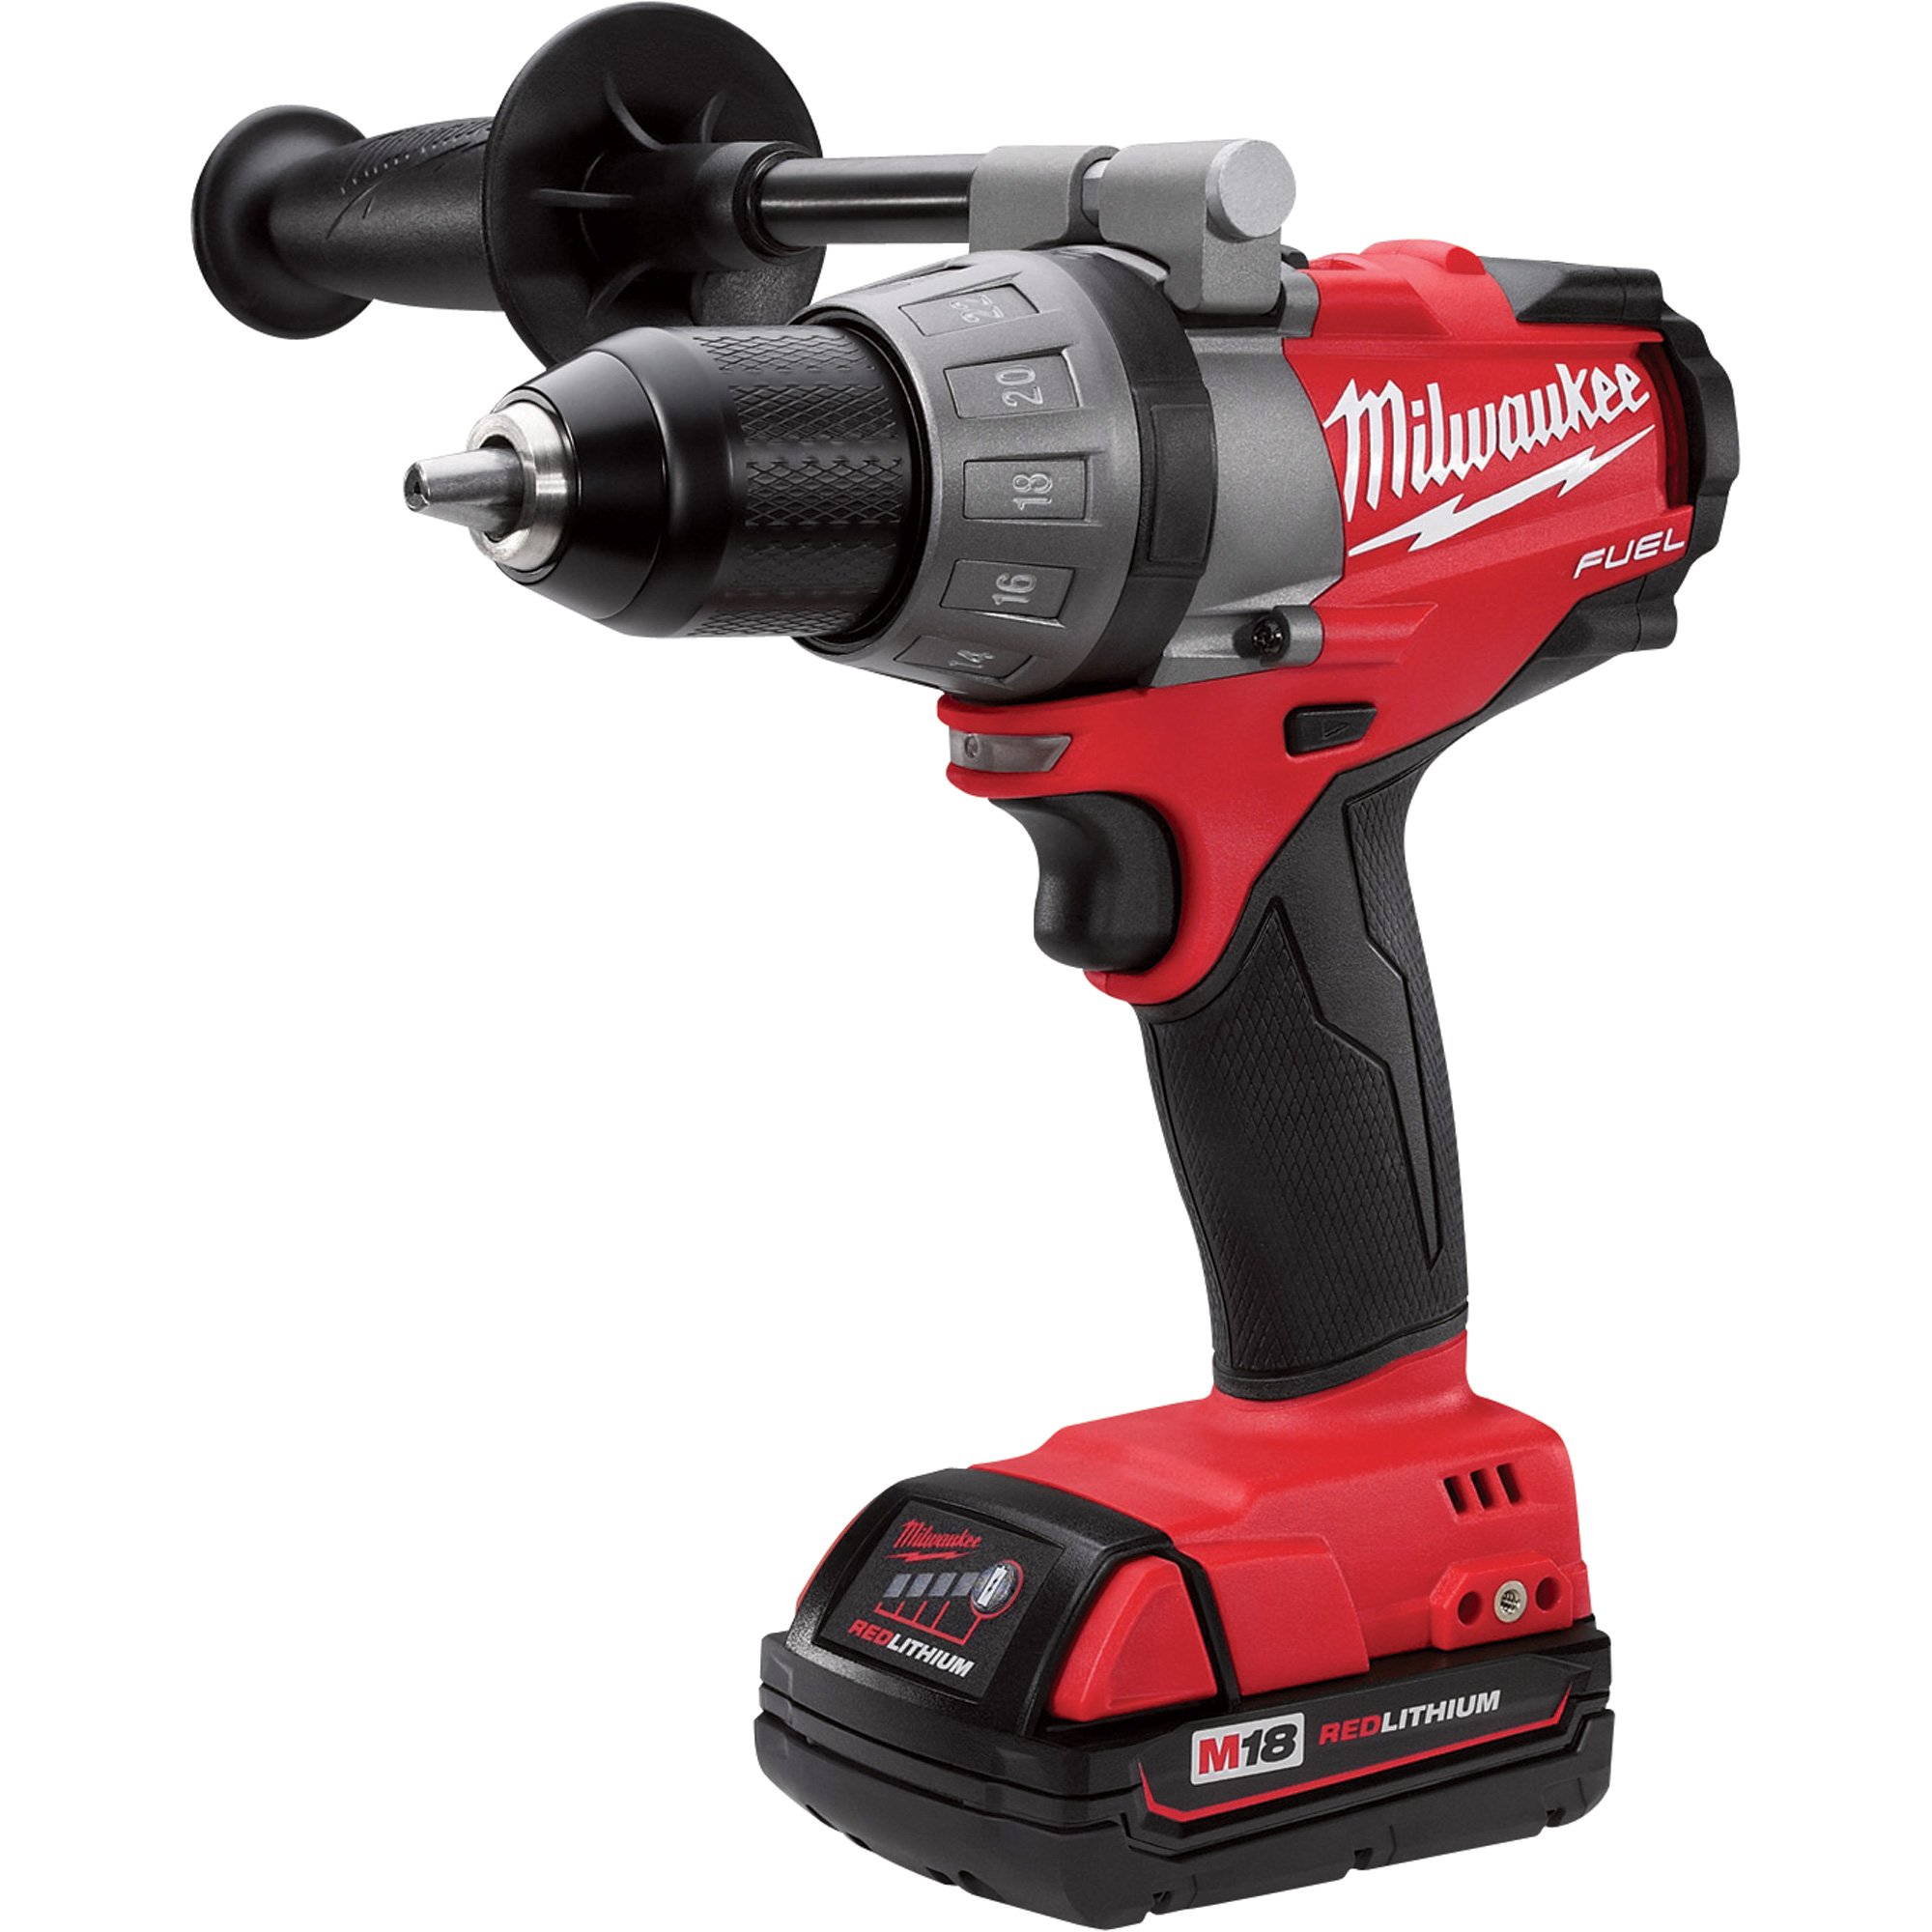 Milwaukee M18 Fuel Drill/Driver Kit — 1/2in. Chuck, M18 Compact RedLithium  Batteries, Model# 2603-22CT Northern Tool